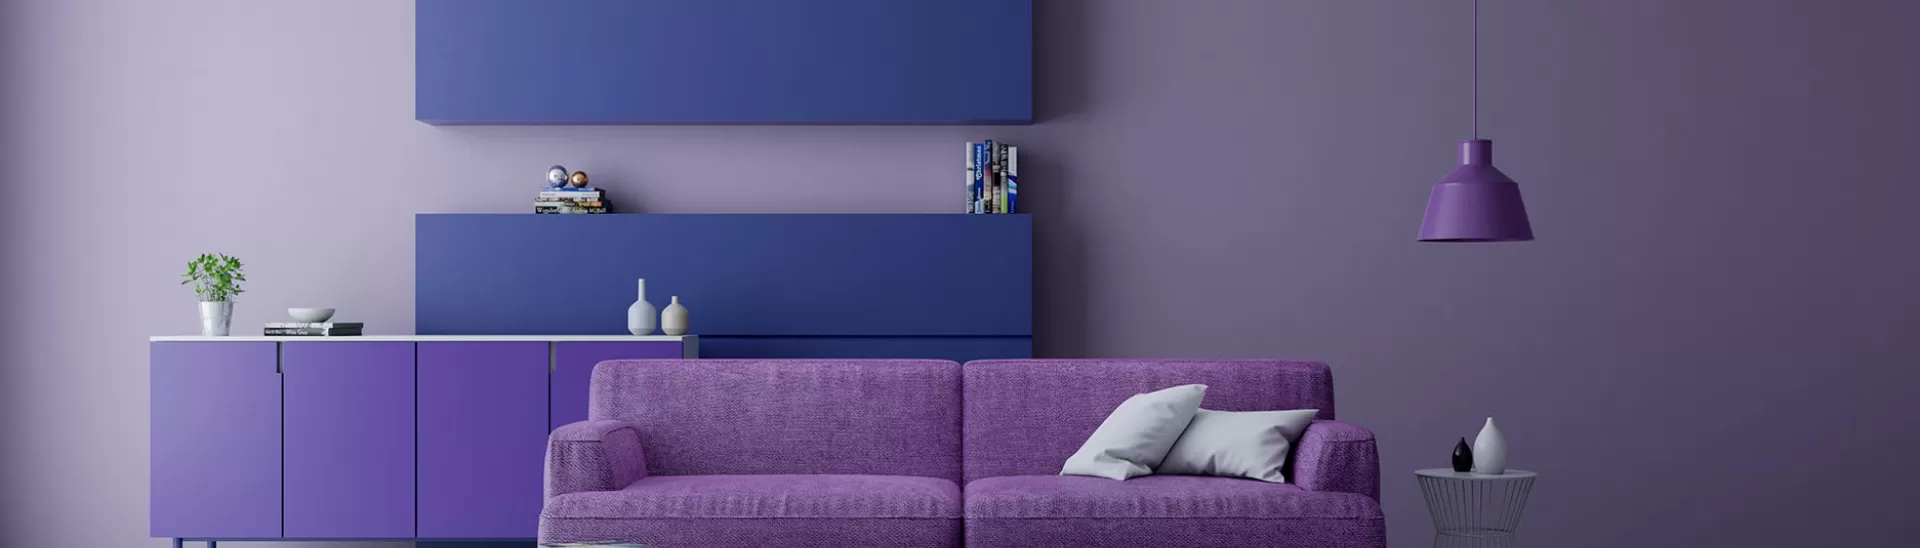 Experiment with 5 Shades of Purple in Your Home